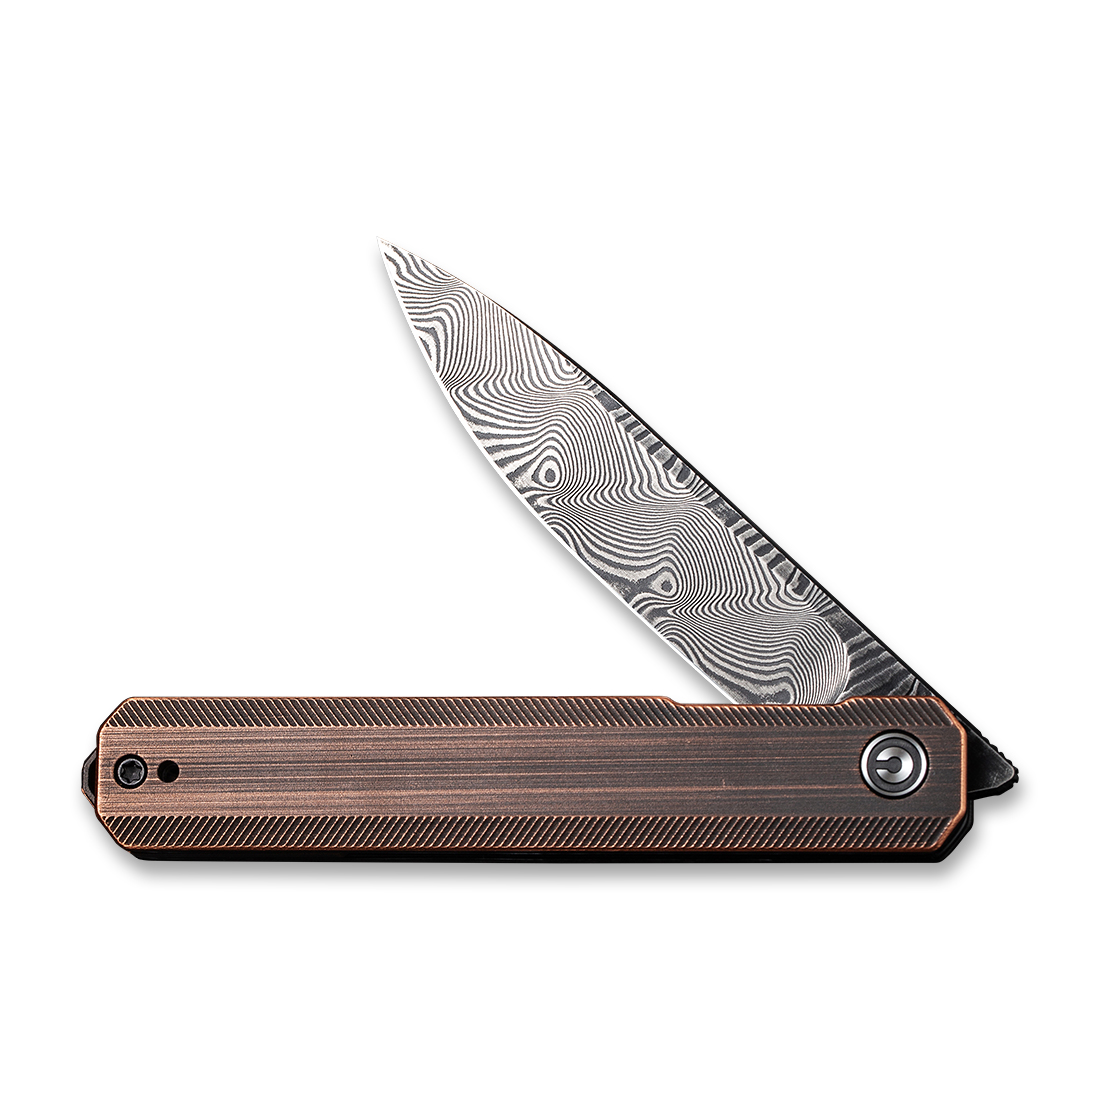 CIVIVI Exarch Liner Lock C2003DS-2 Knife Damascus Steel & Solid Copper Pocket Knives